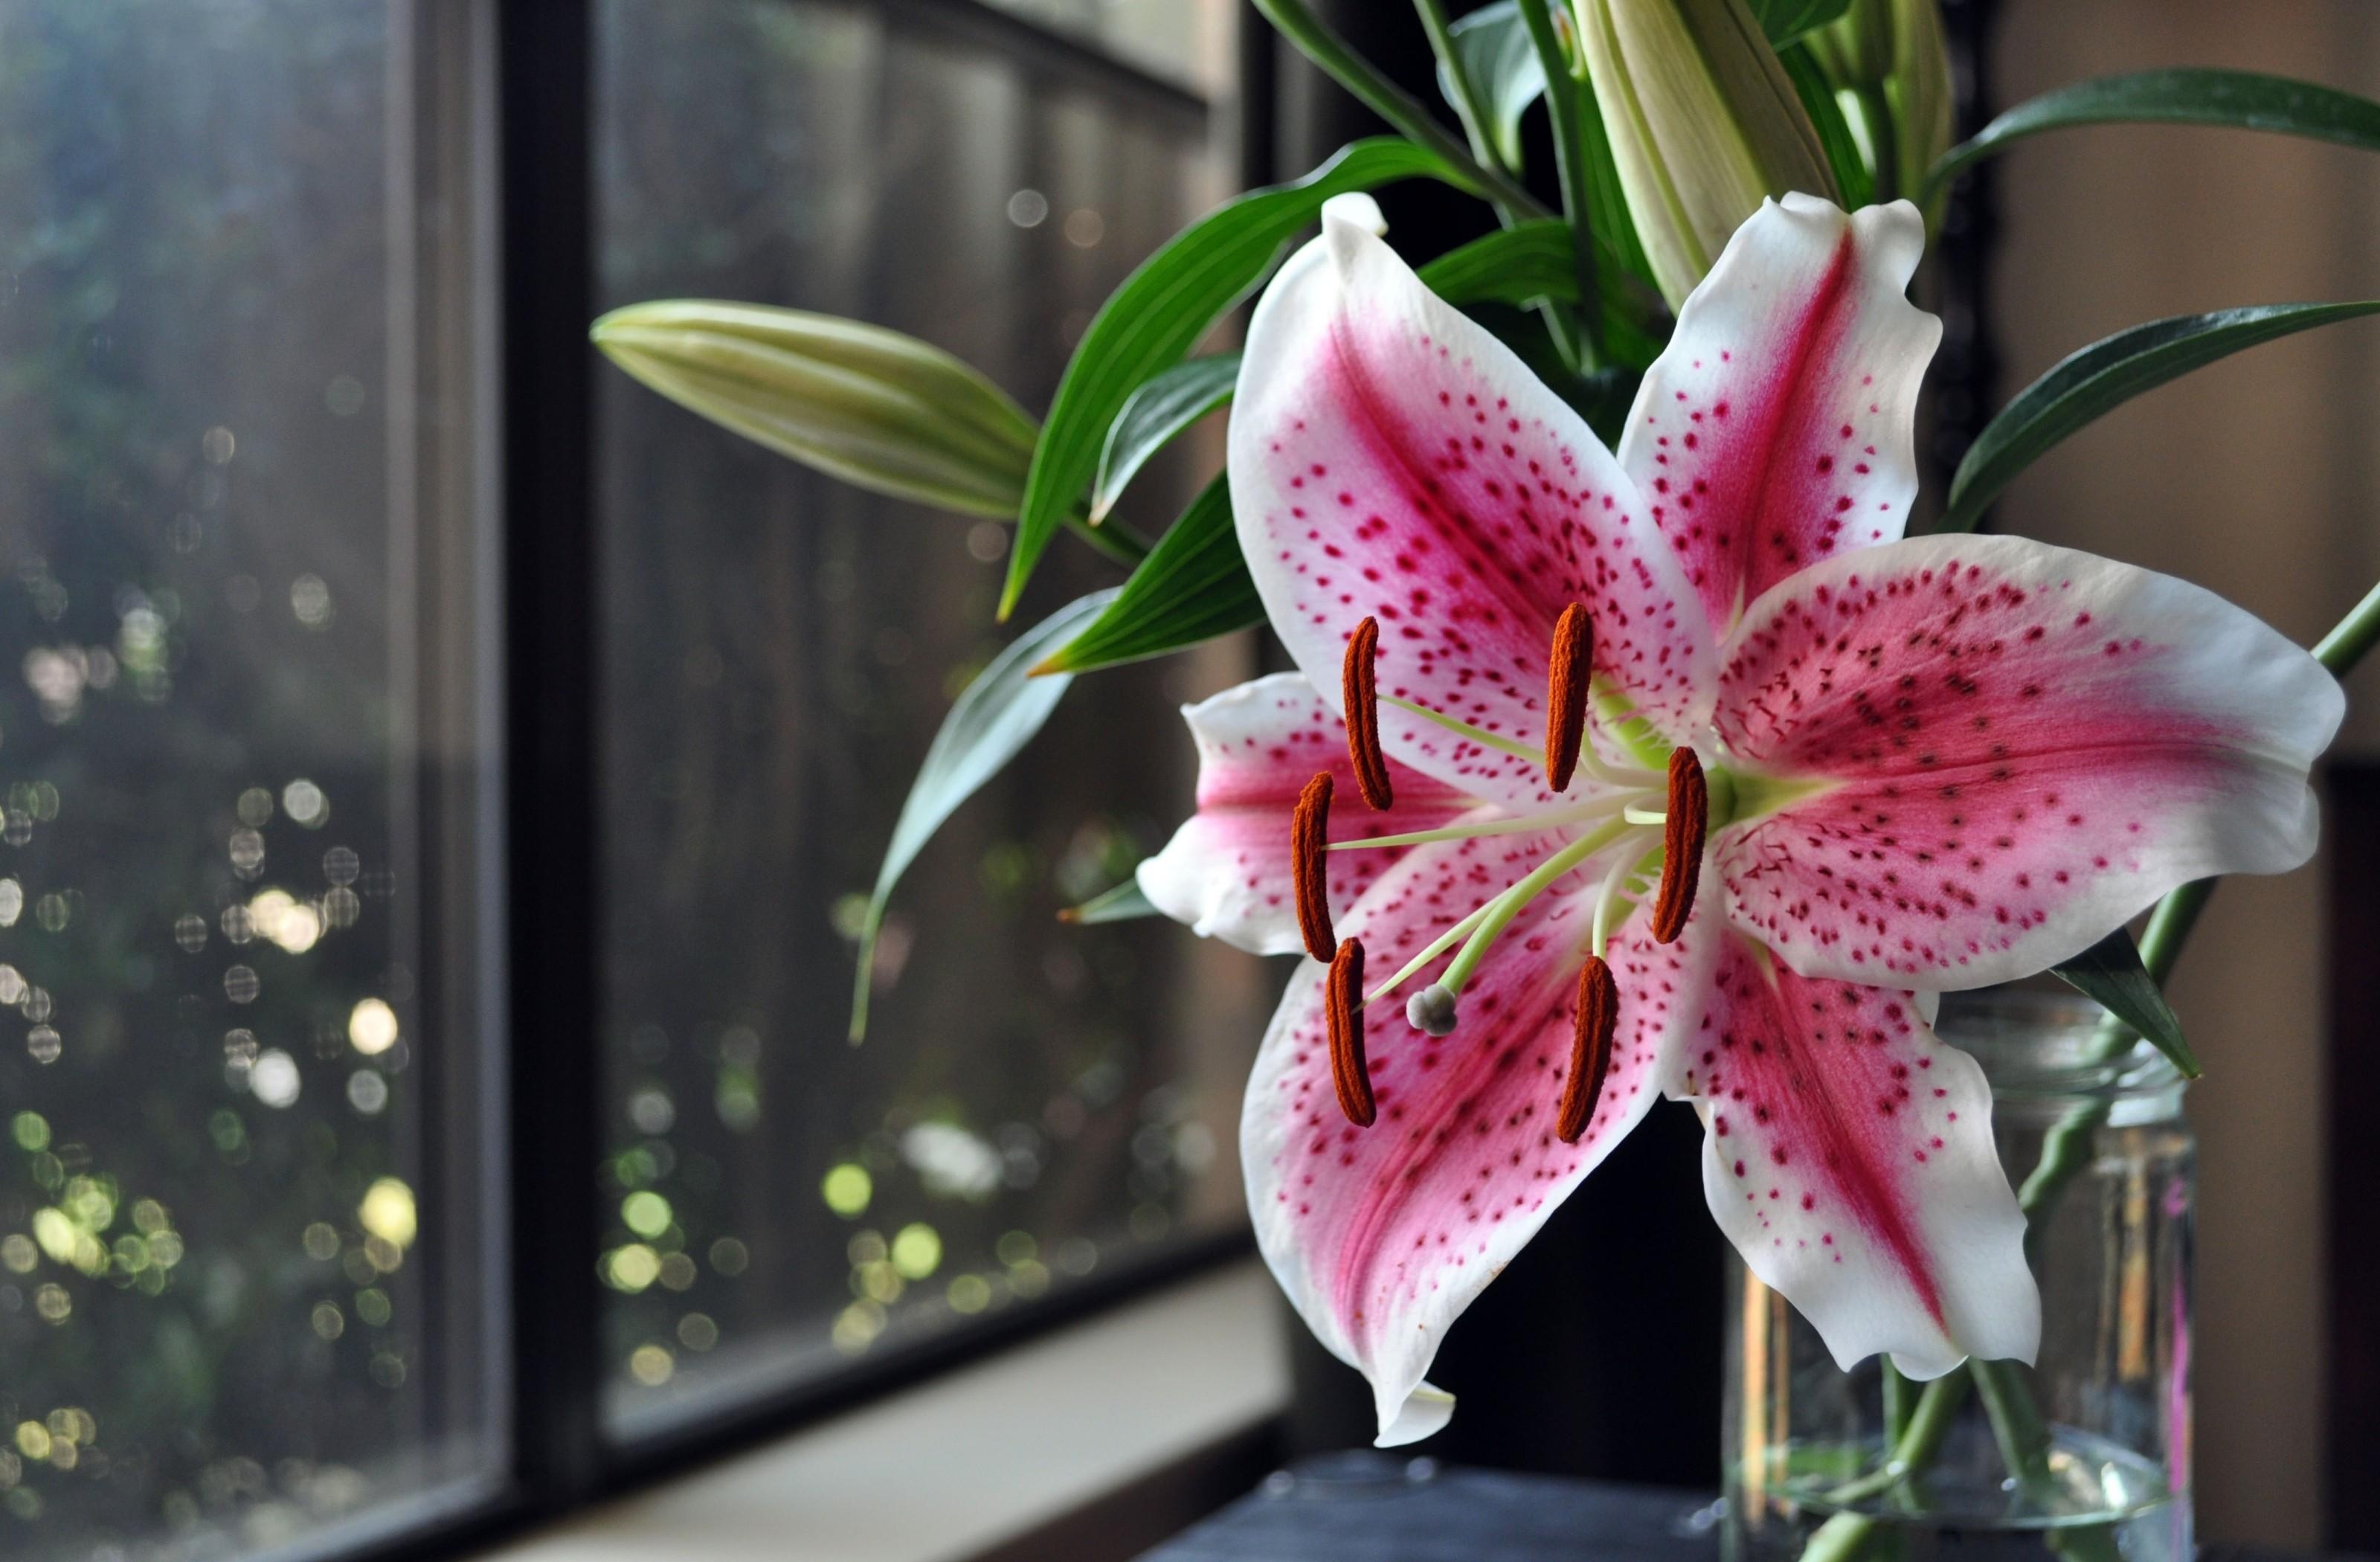 lily, flowers, flower, spotted, window, vase, stamens